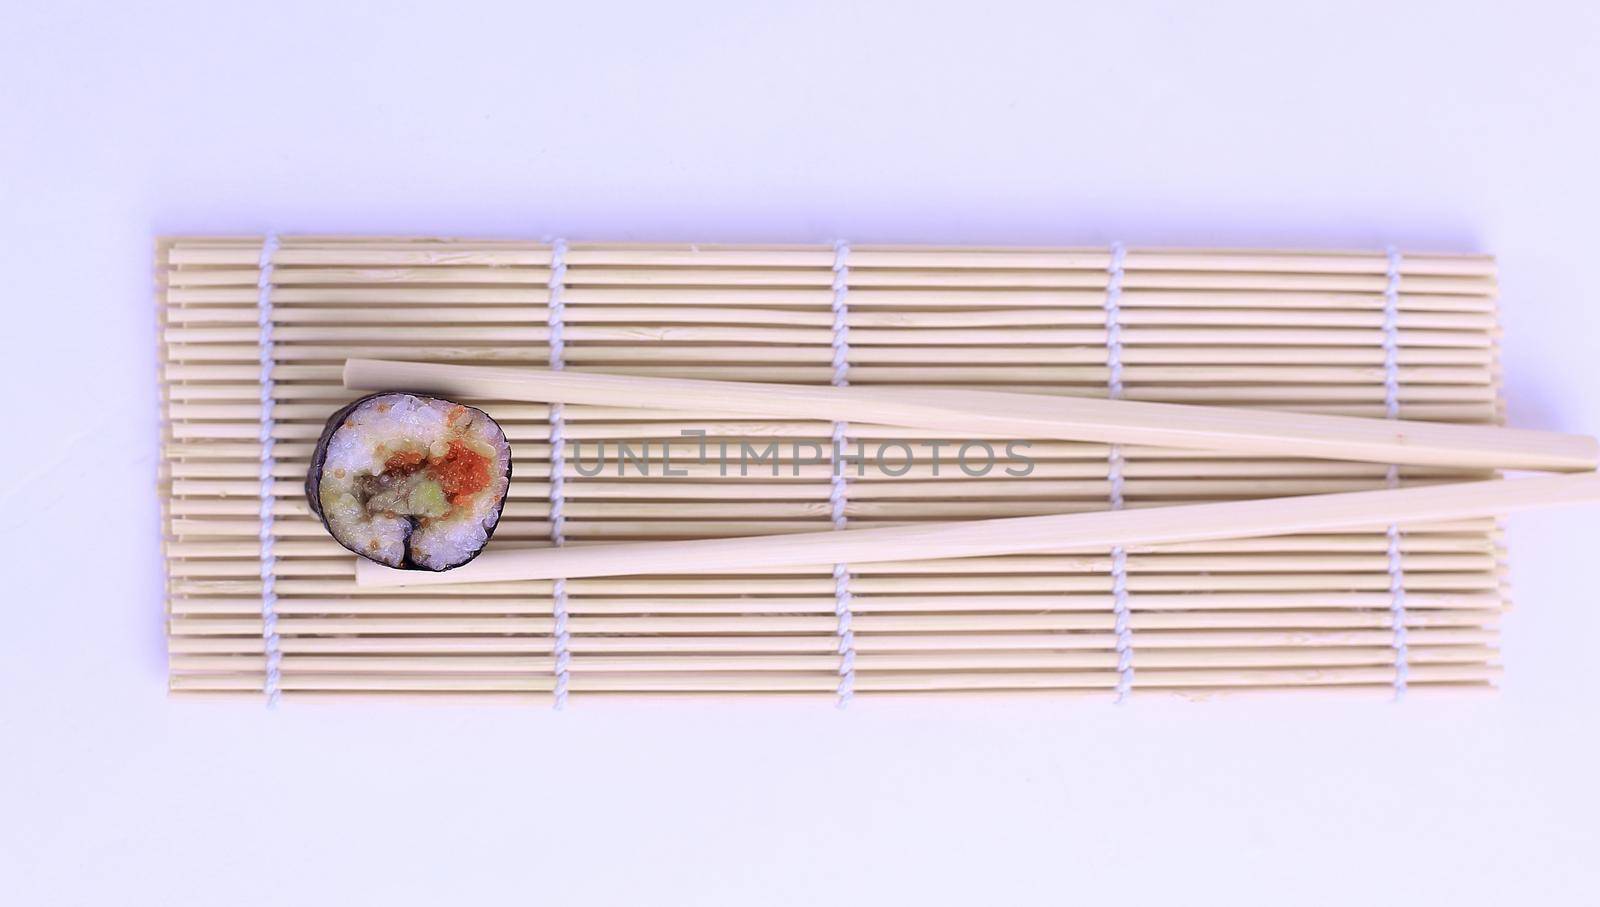 large sushi and chopsticks .isolated on a light background.photo with copy space